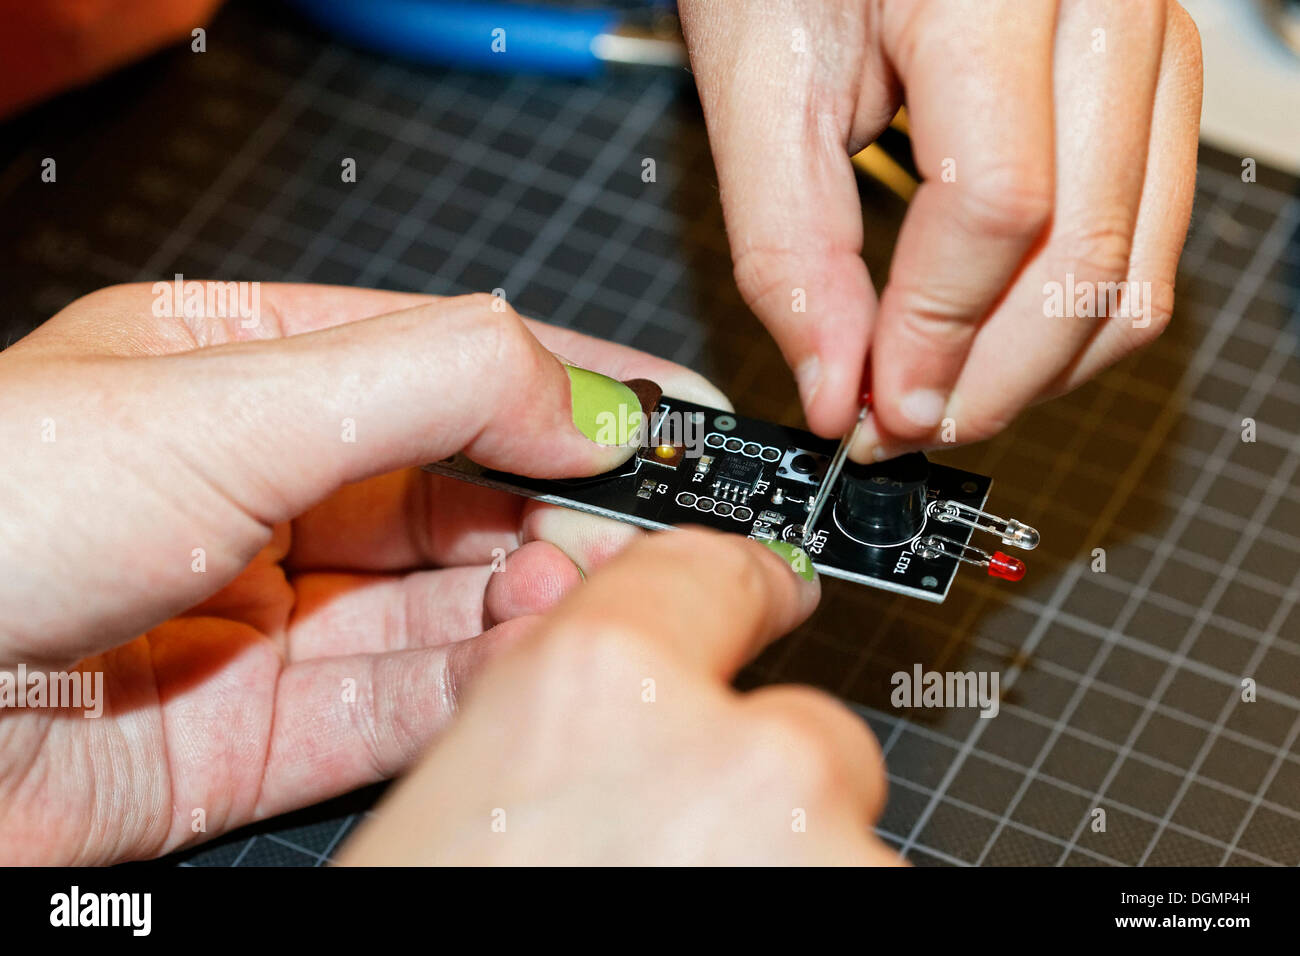 Hand with painted nails and a child's hand working together on an electronic device with light emitting diodes, IdeenPark 2012, Stock Photo